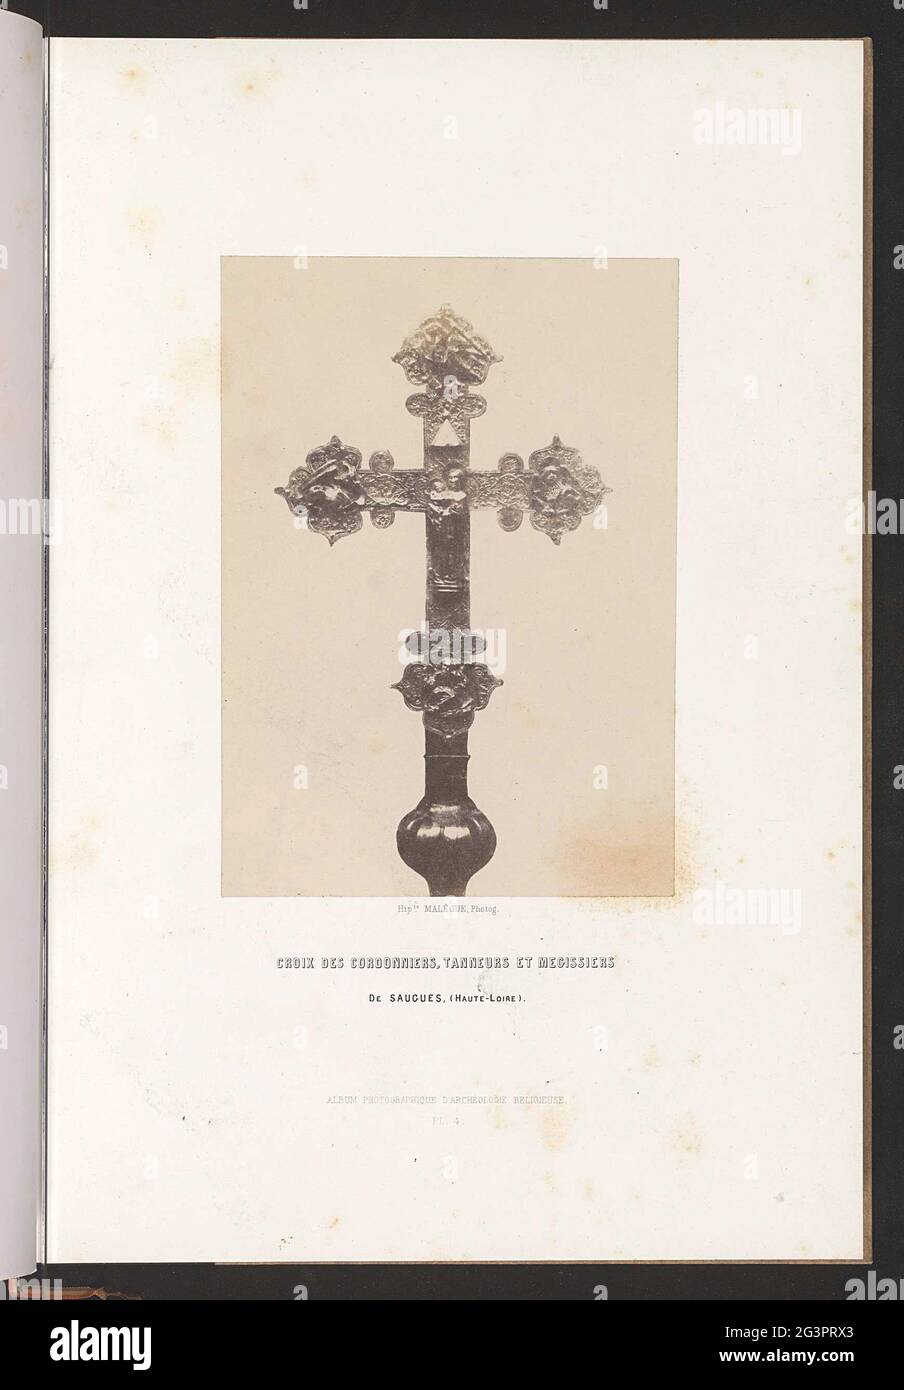 Crucifix afkomstig uit sagues; Cross of shoemakers, tanners and guy. . Stock Photo